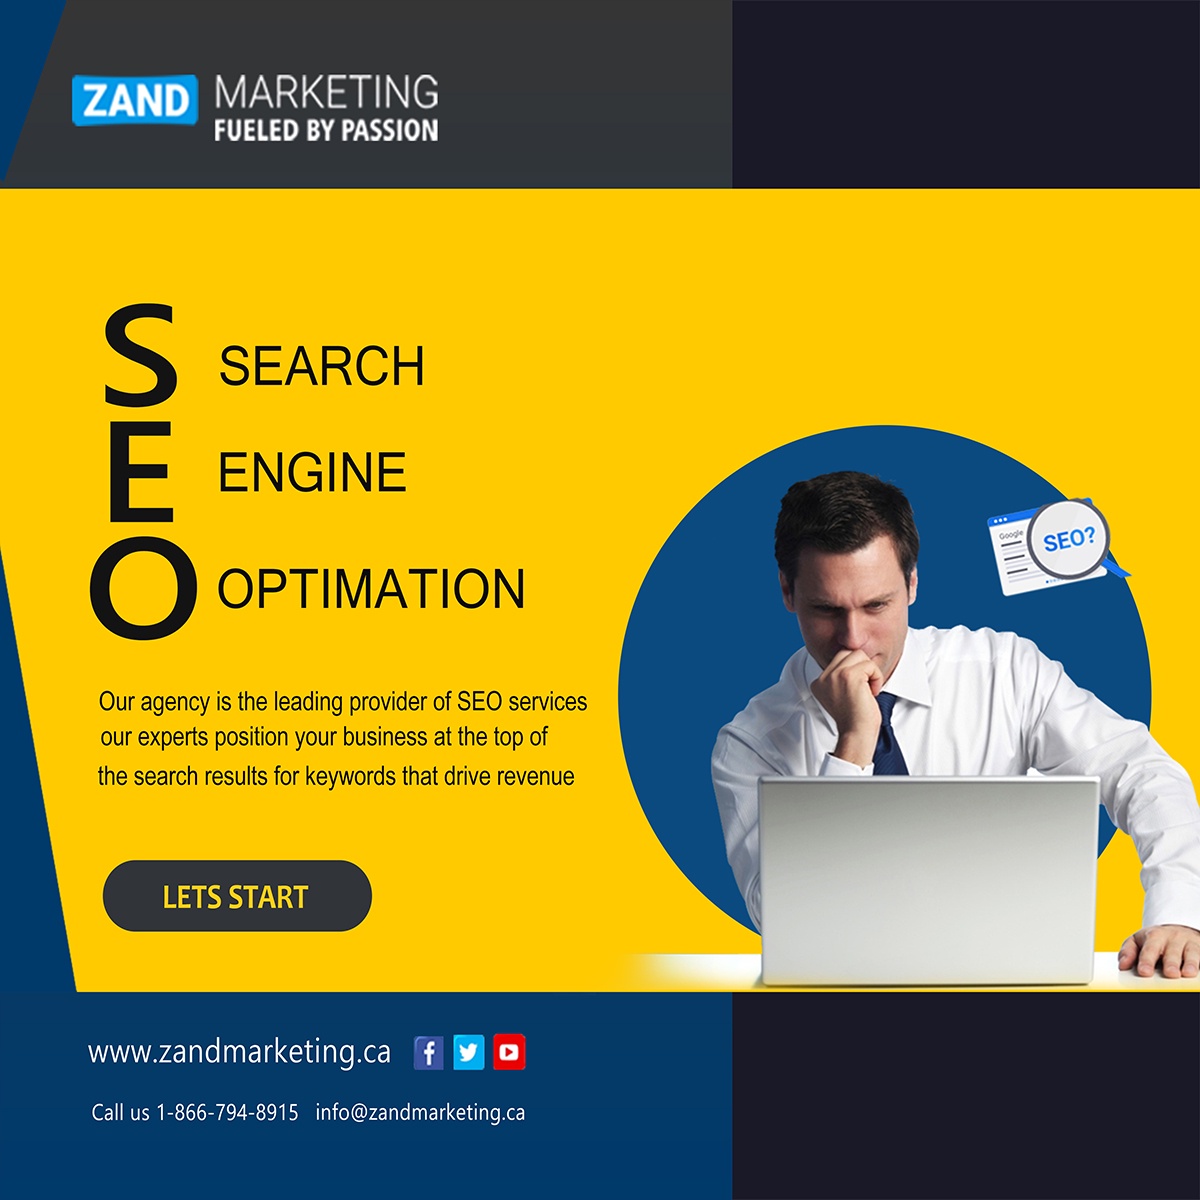 How can an SEO expert help your business?